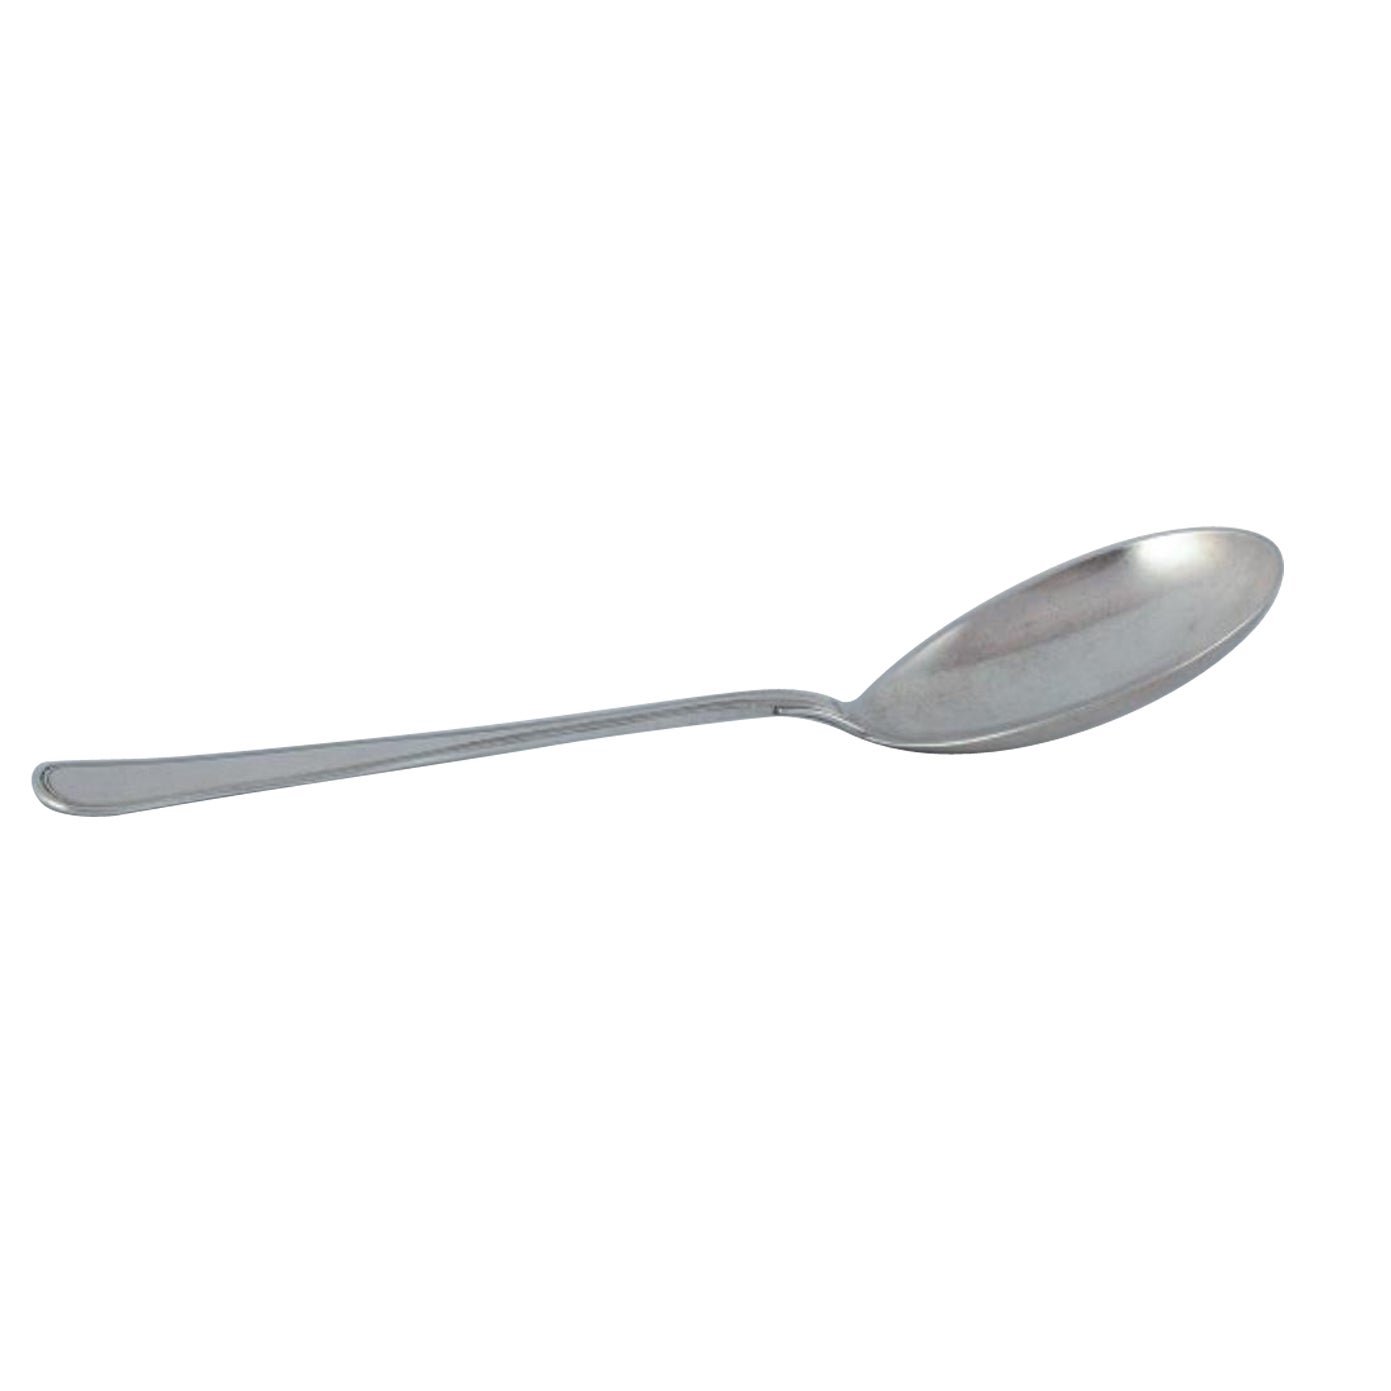 Cohr, Danish silversmith. "Old Danish" serving spoon in 830 silver.  For Sale